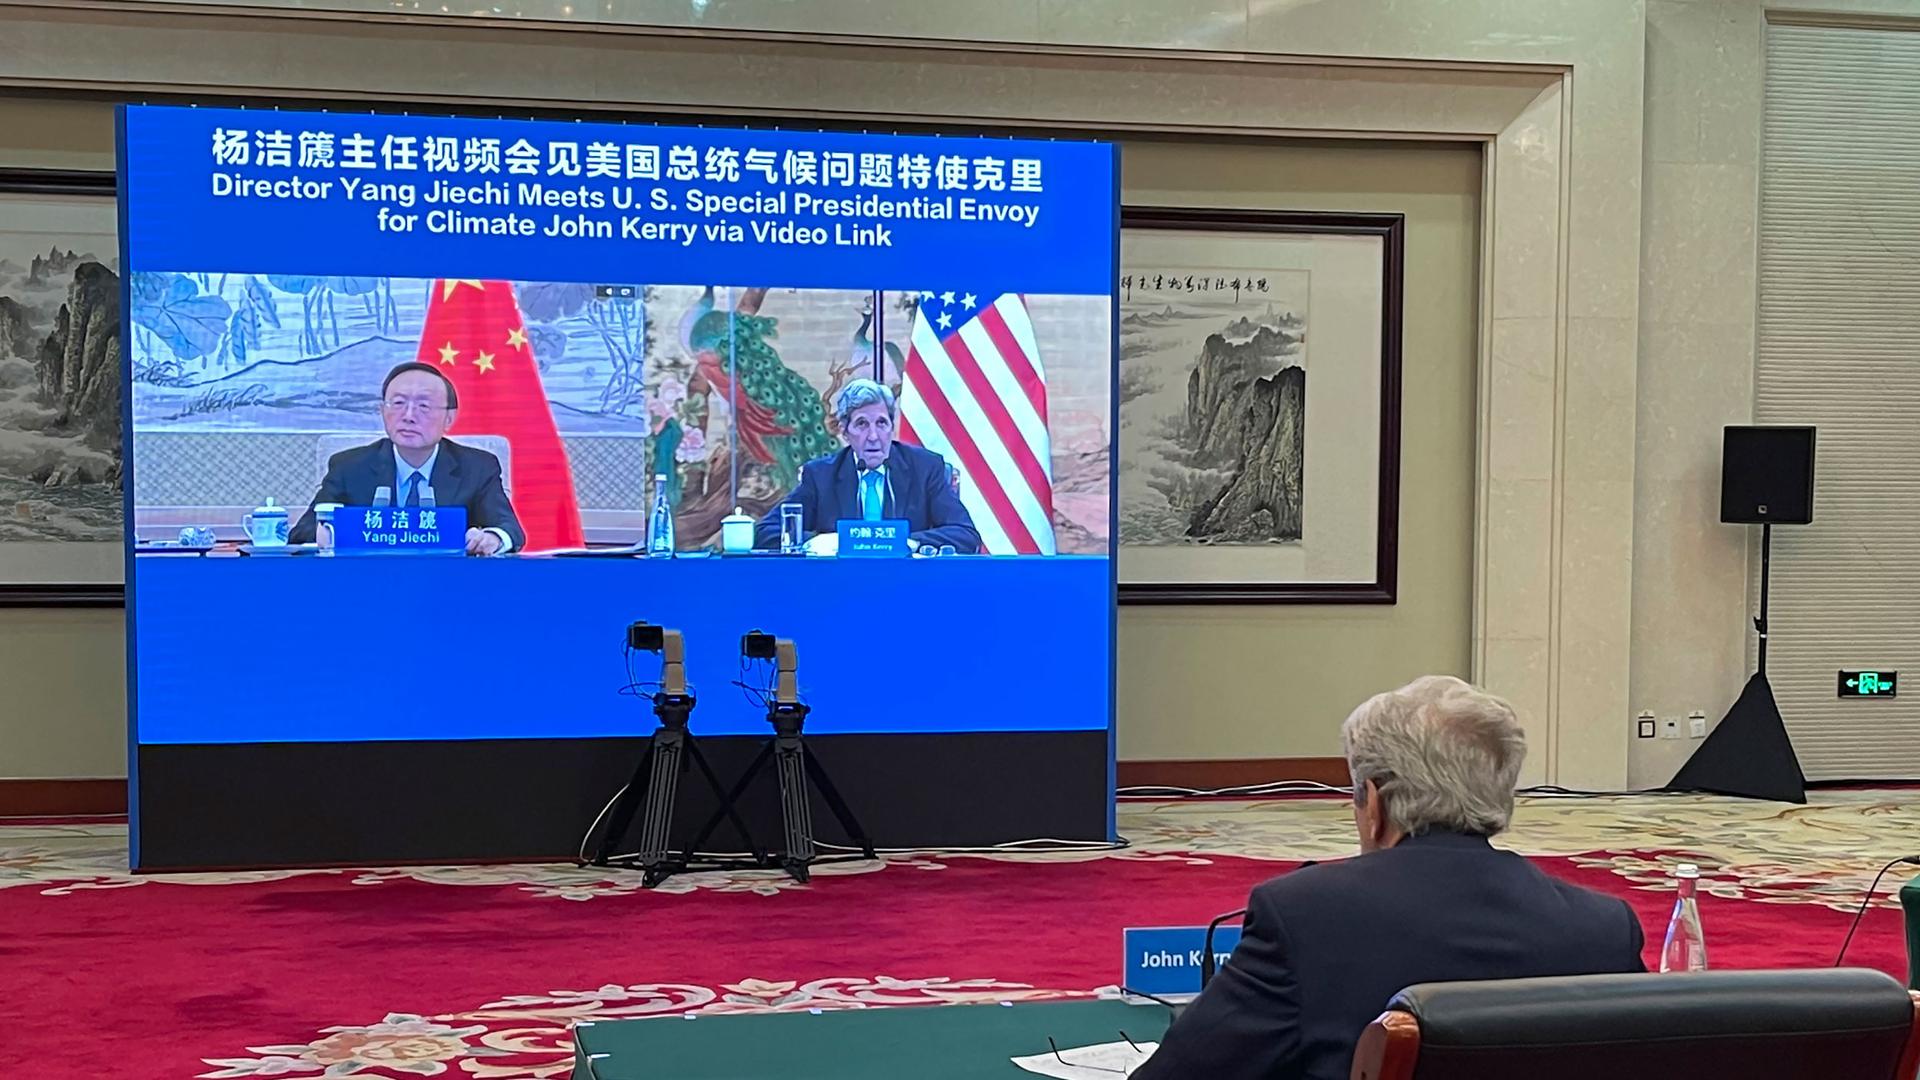 In this Sept. 2, 2021, file photo provided by the US Department of State, US Special Presidential Envoy for Climate John Kerry attends a meeting with Yang Jiechi, director of China's Office of the Central Commission for Foreign Affairs